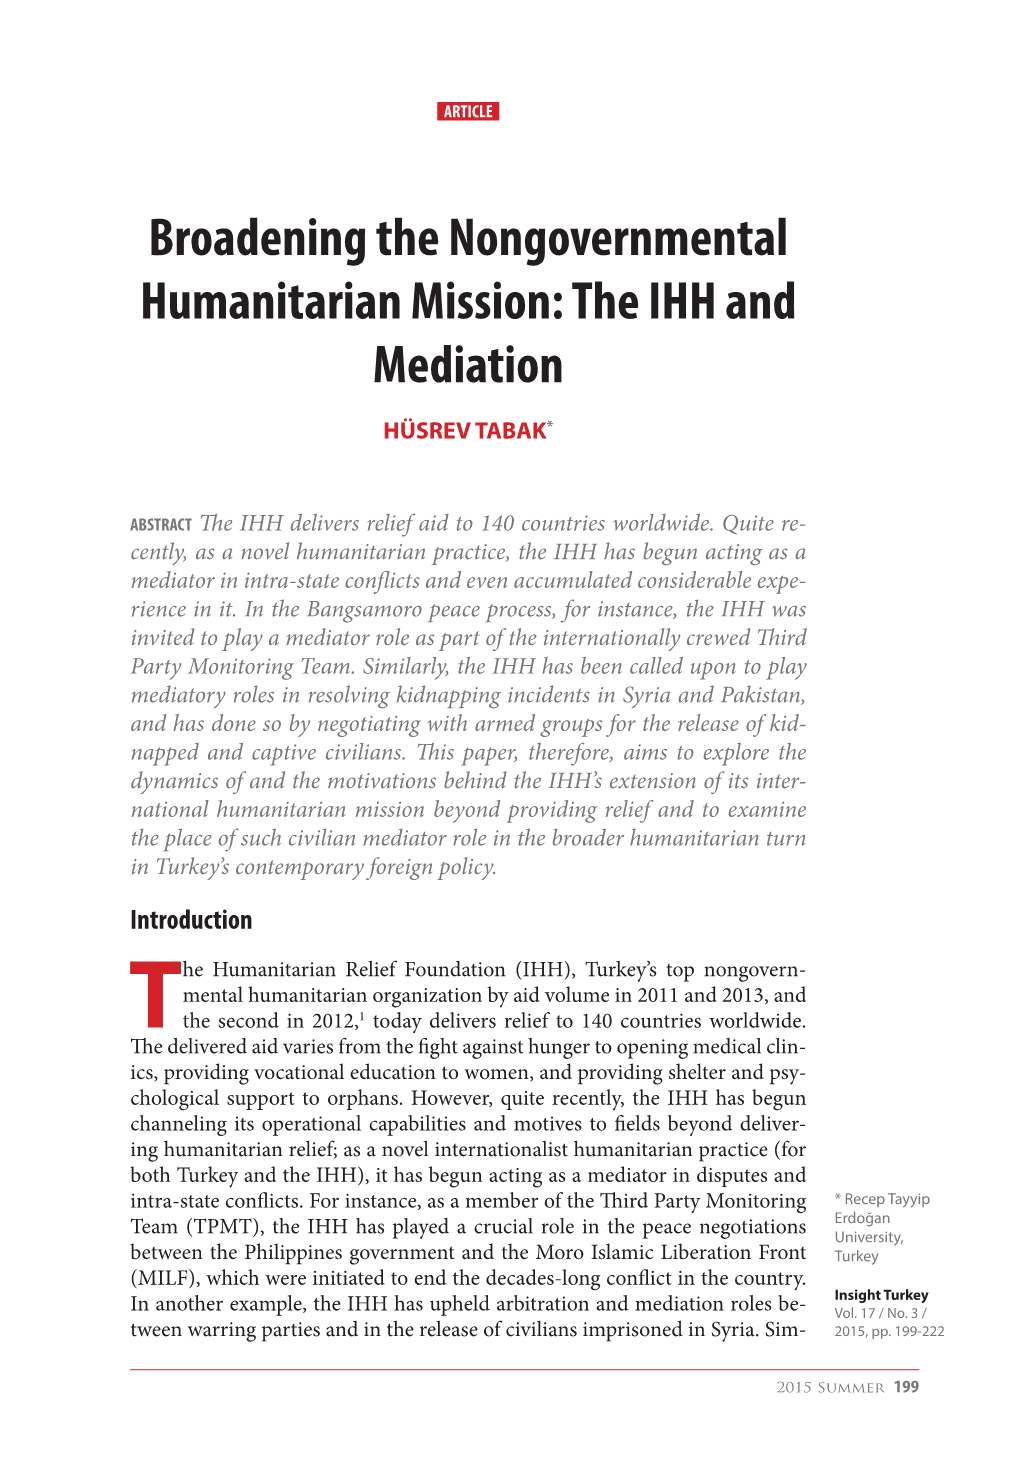 Broadening the Nongovernmental Humanitarian Mission: the Ihh and Mediation